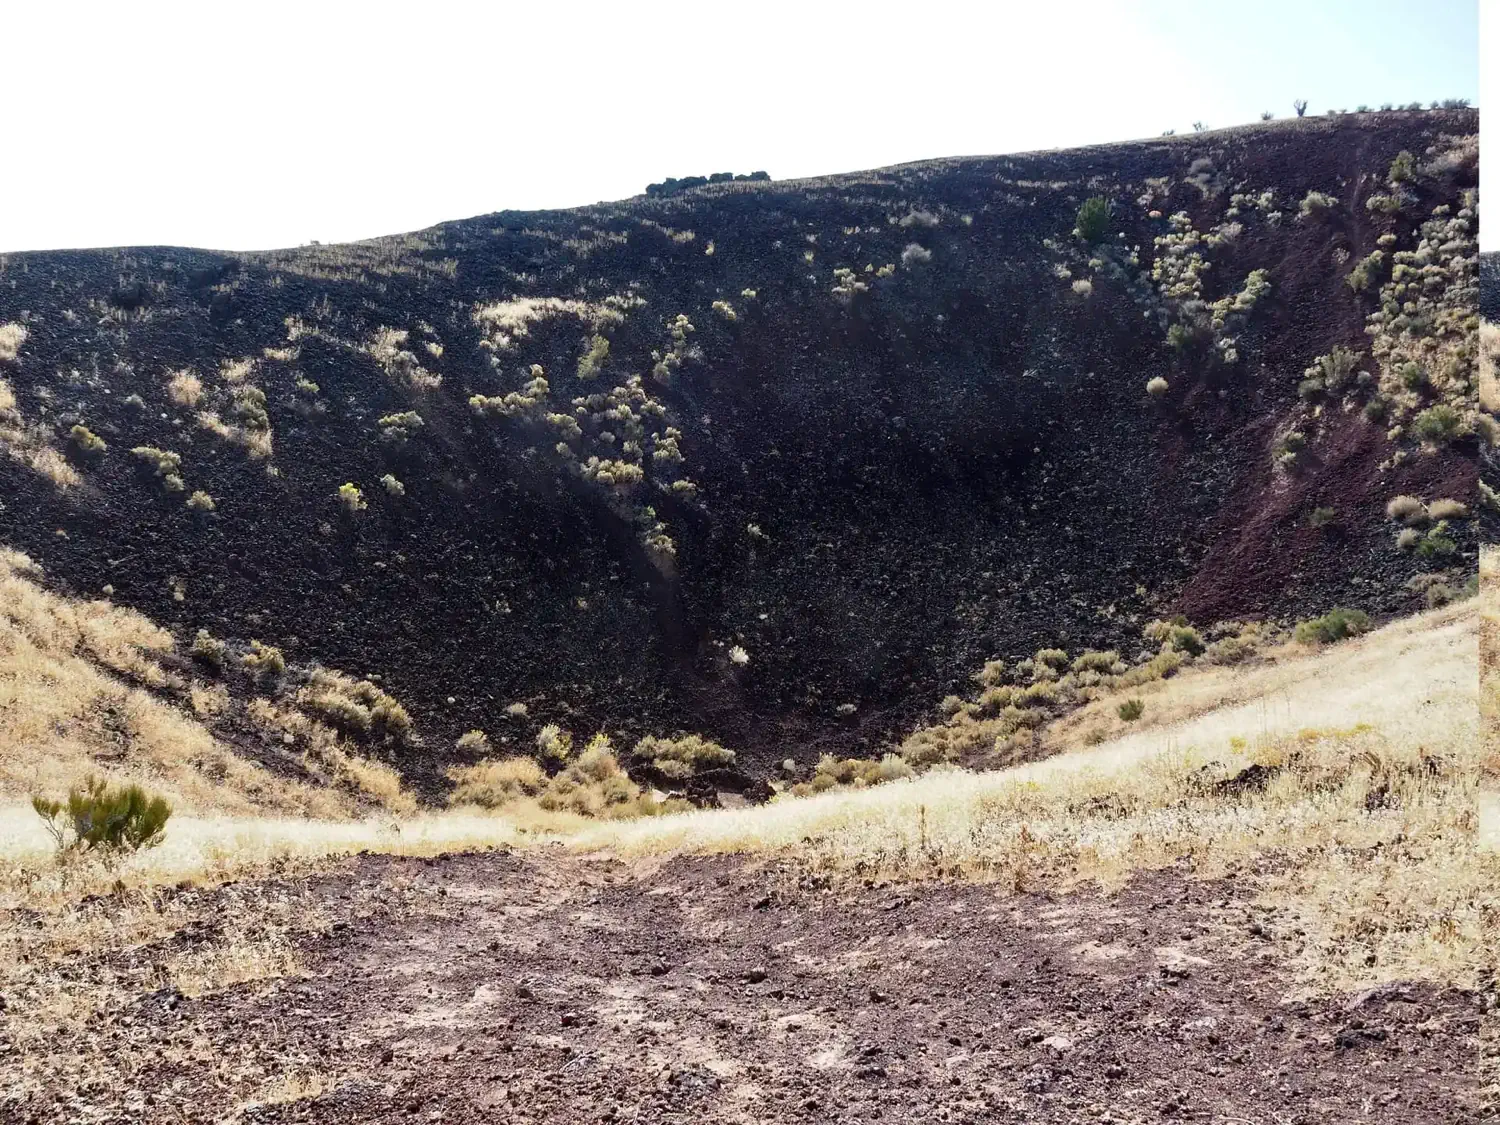 The cinder cone is filled with black lava rock